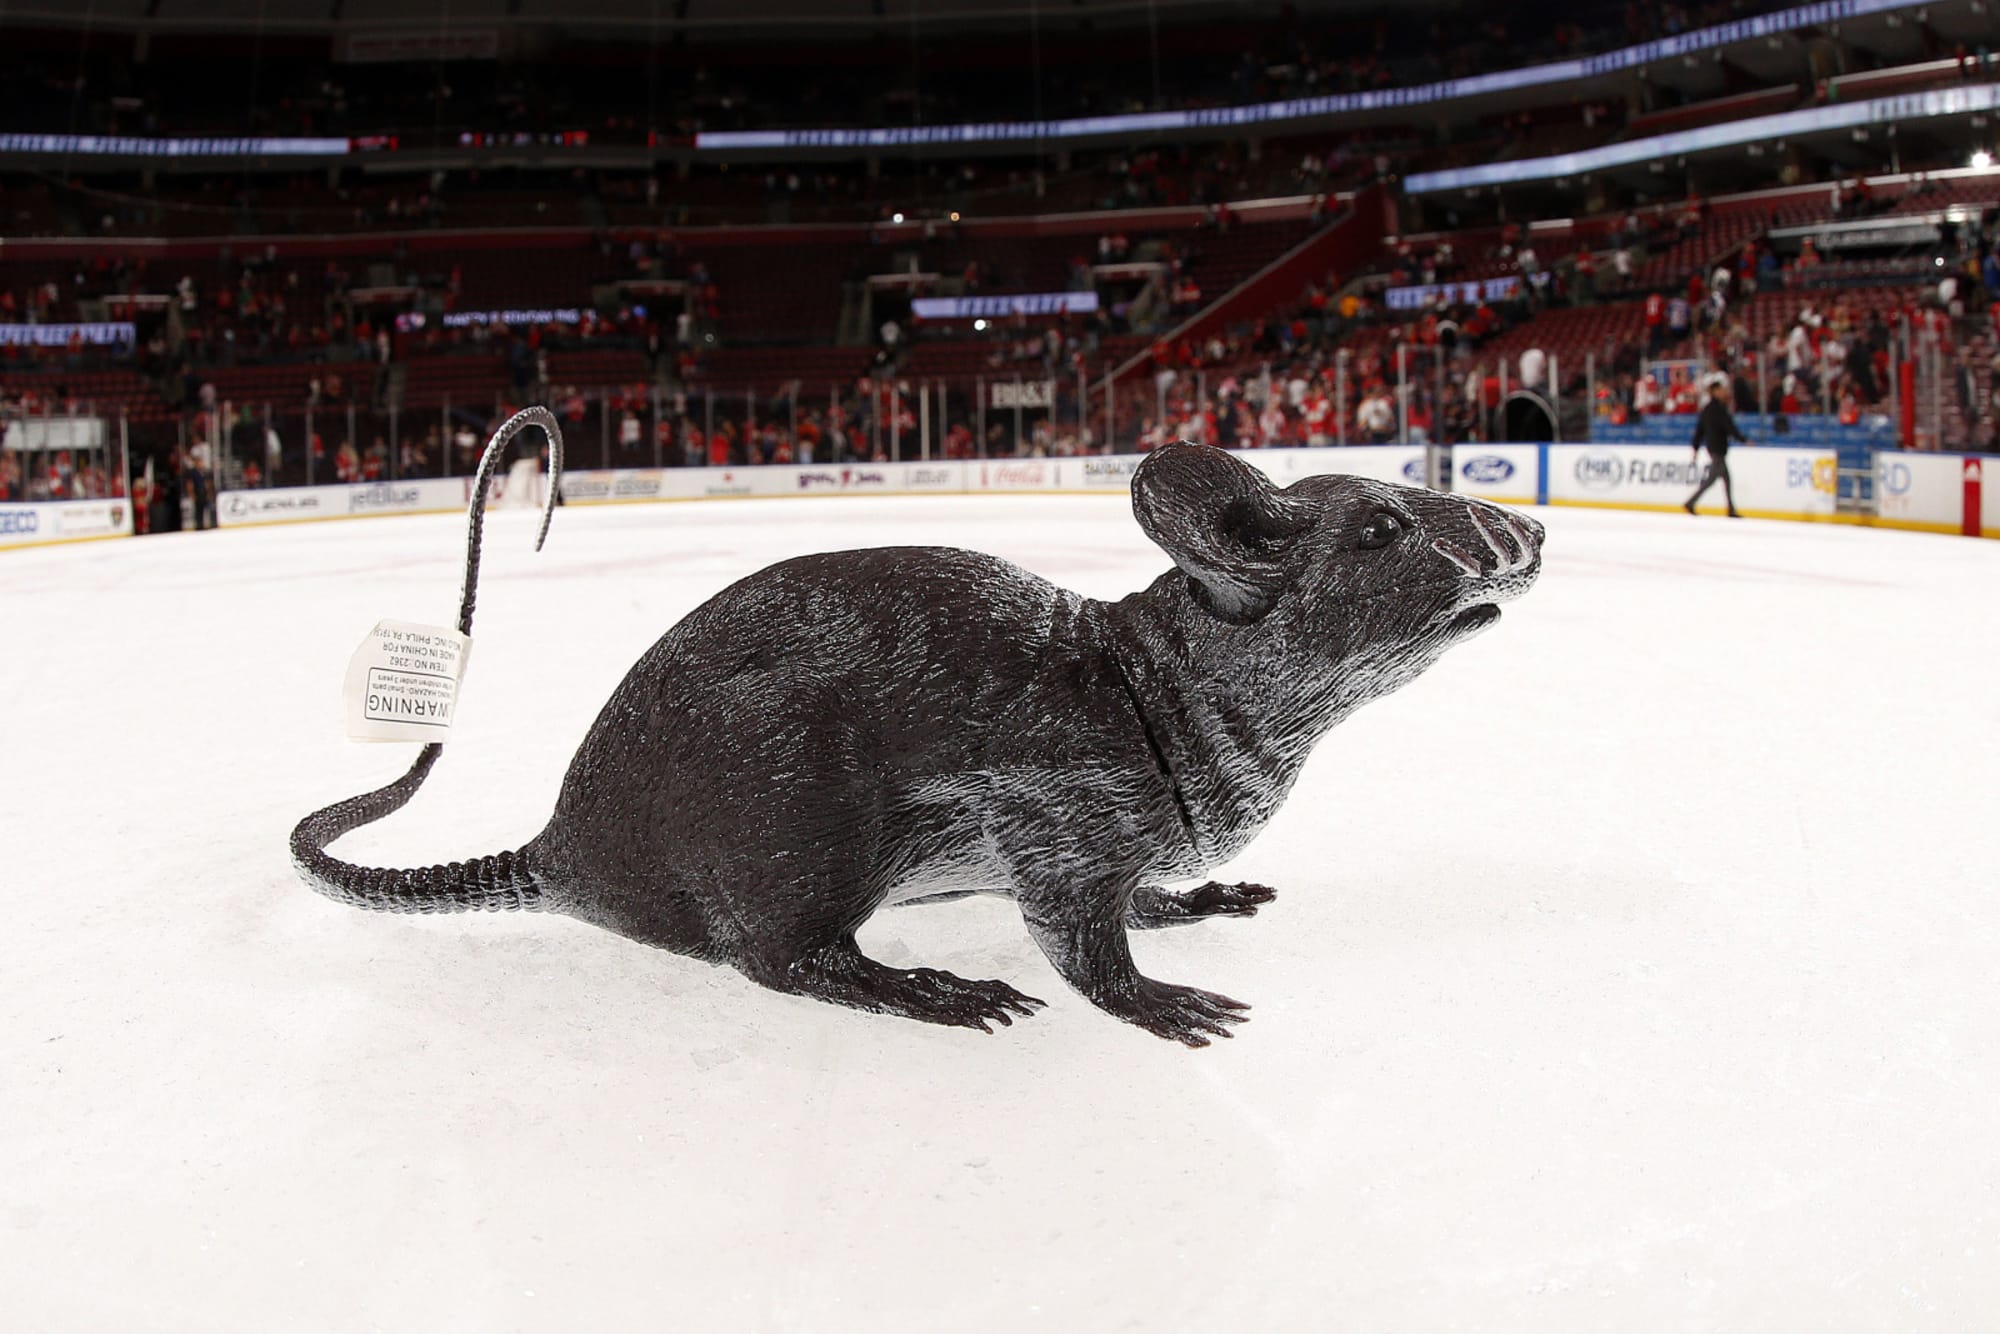 How Plastic Rats Became Forever Linked to the Florida Panthers